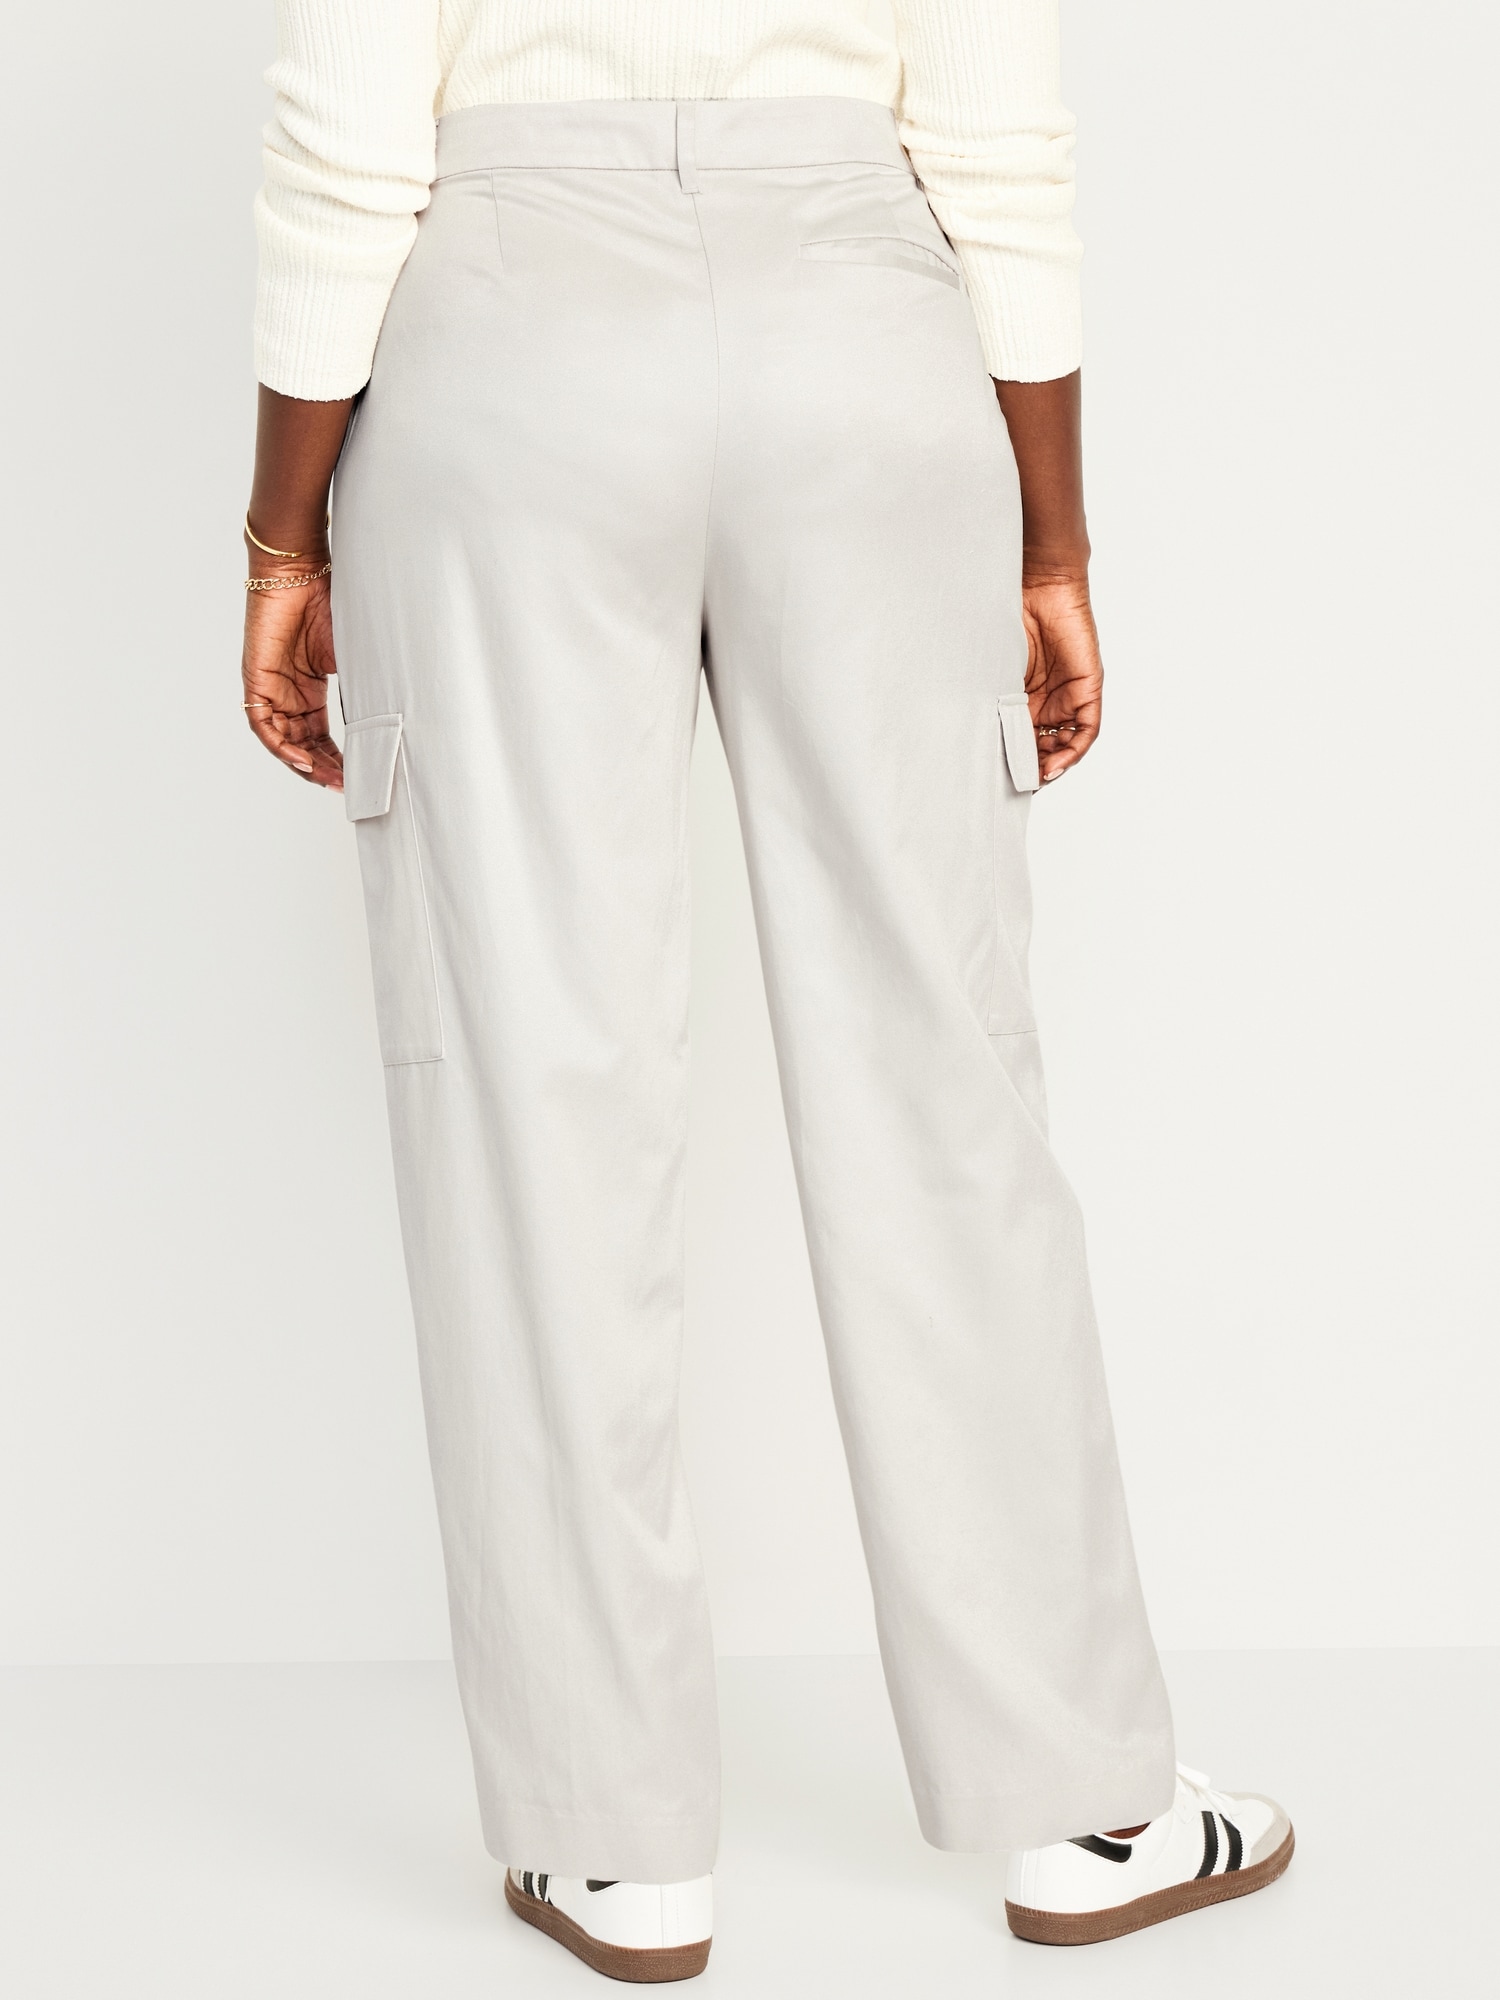 Women's Cargo Pants | Relaxed, Straight | Dickies - Dickies US